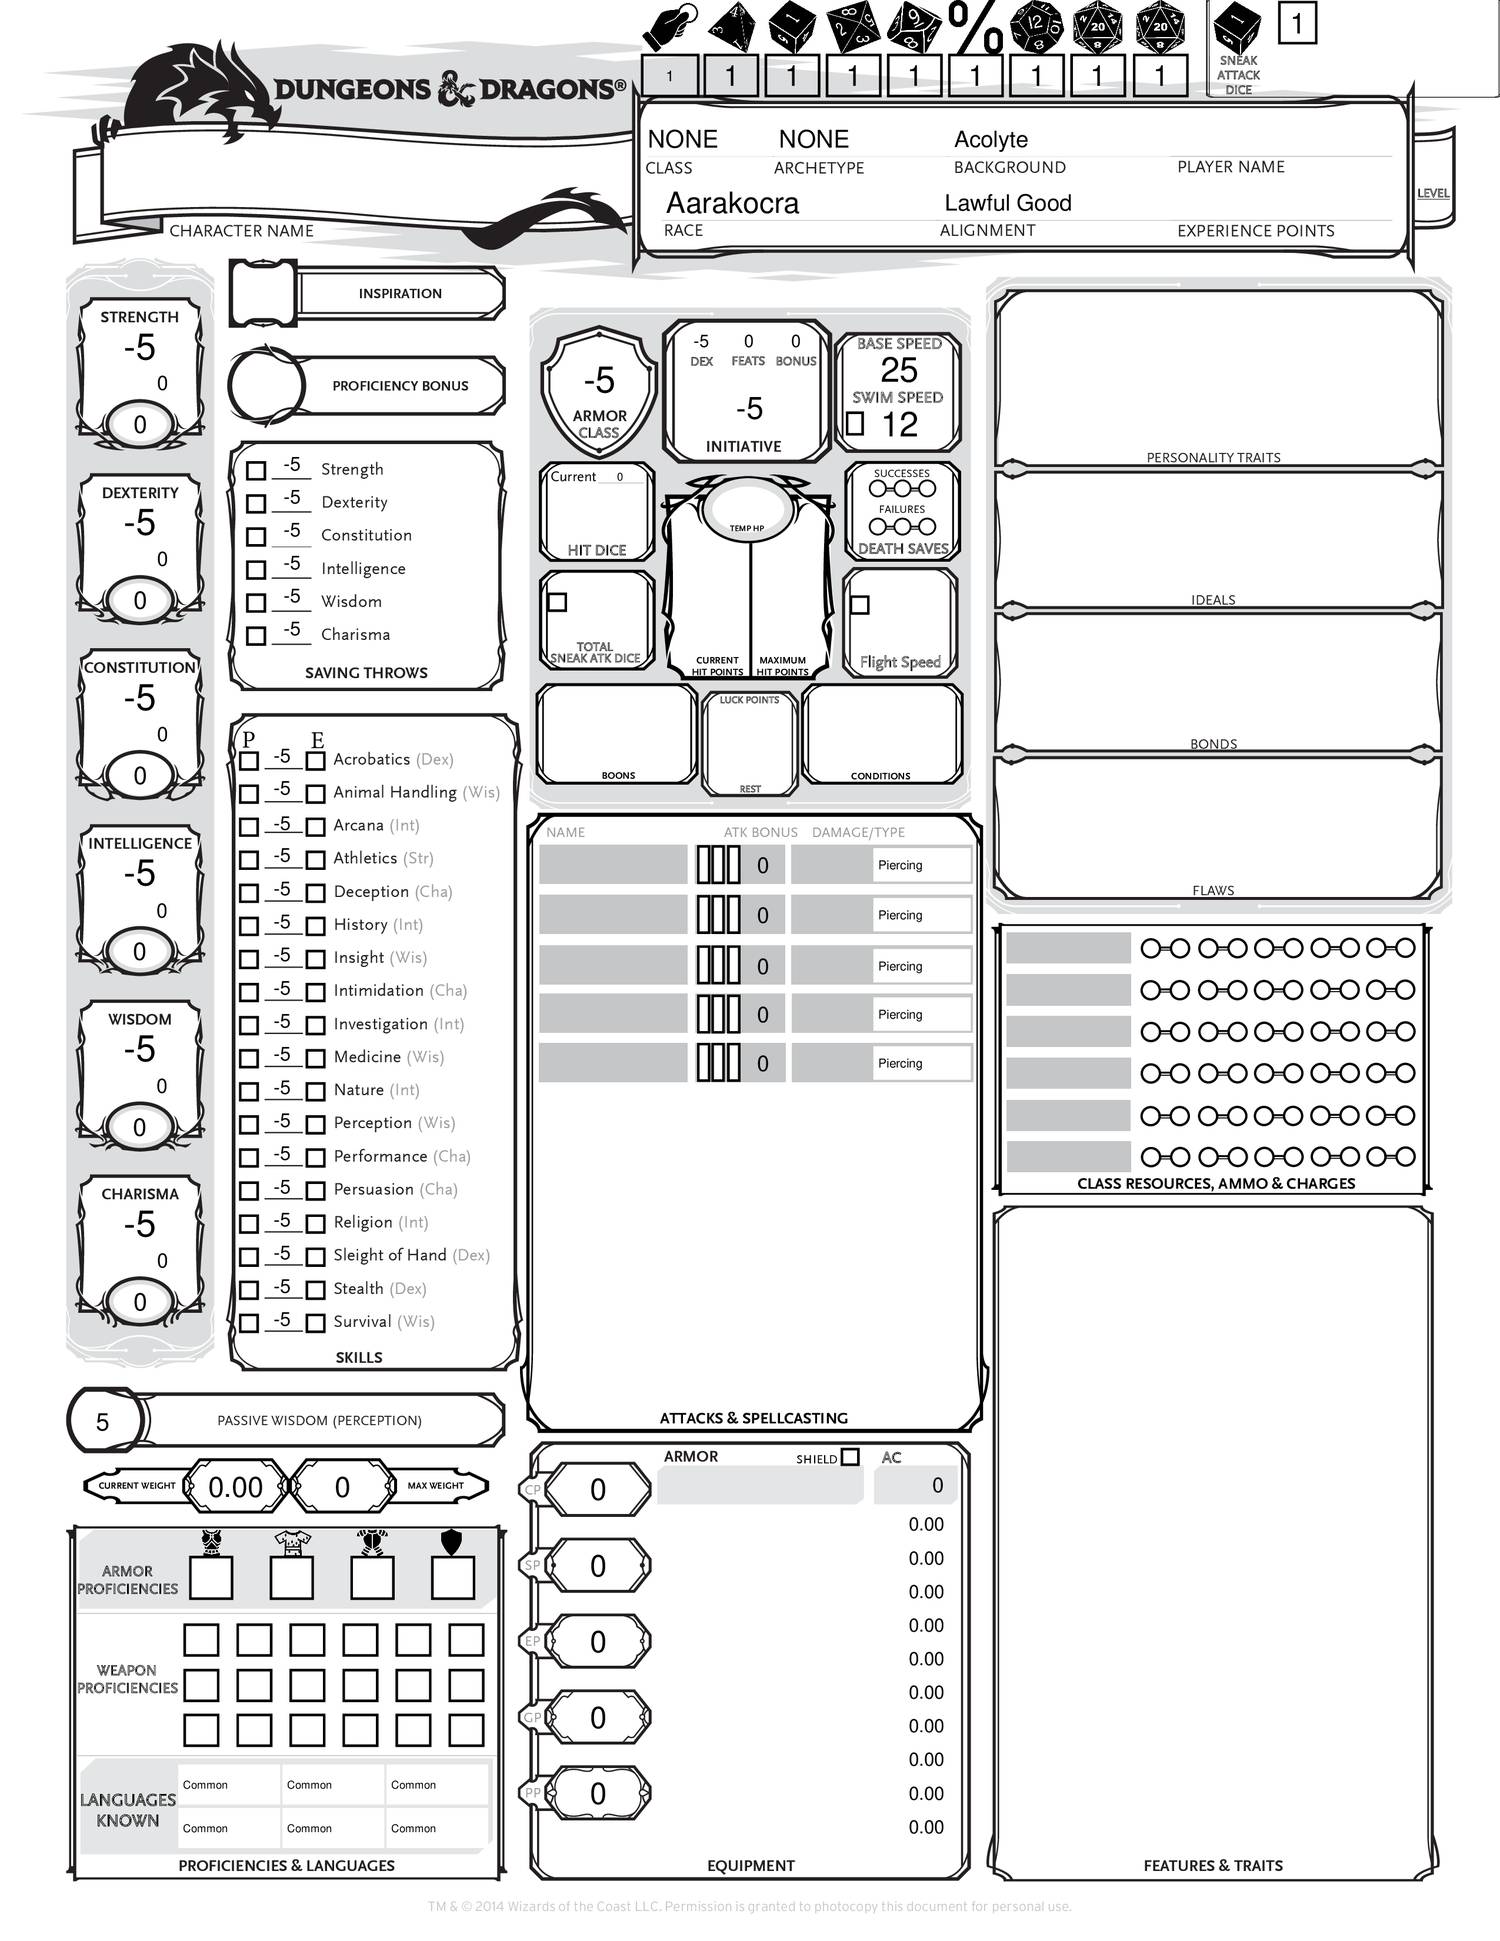 Printable Dnd Character Sheet Pdf - Get Your Hands on Amazing Free ...